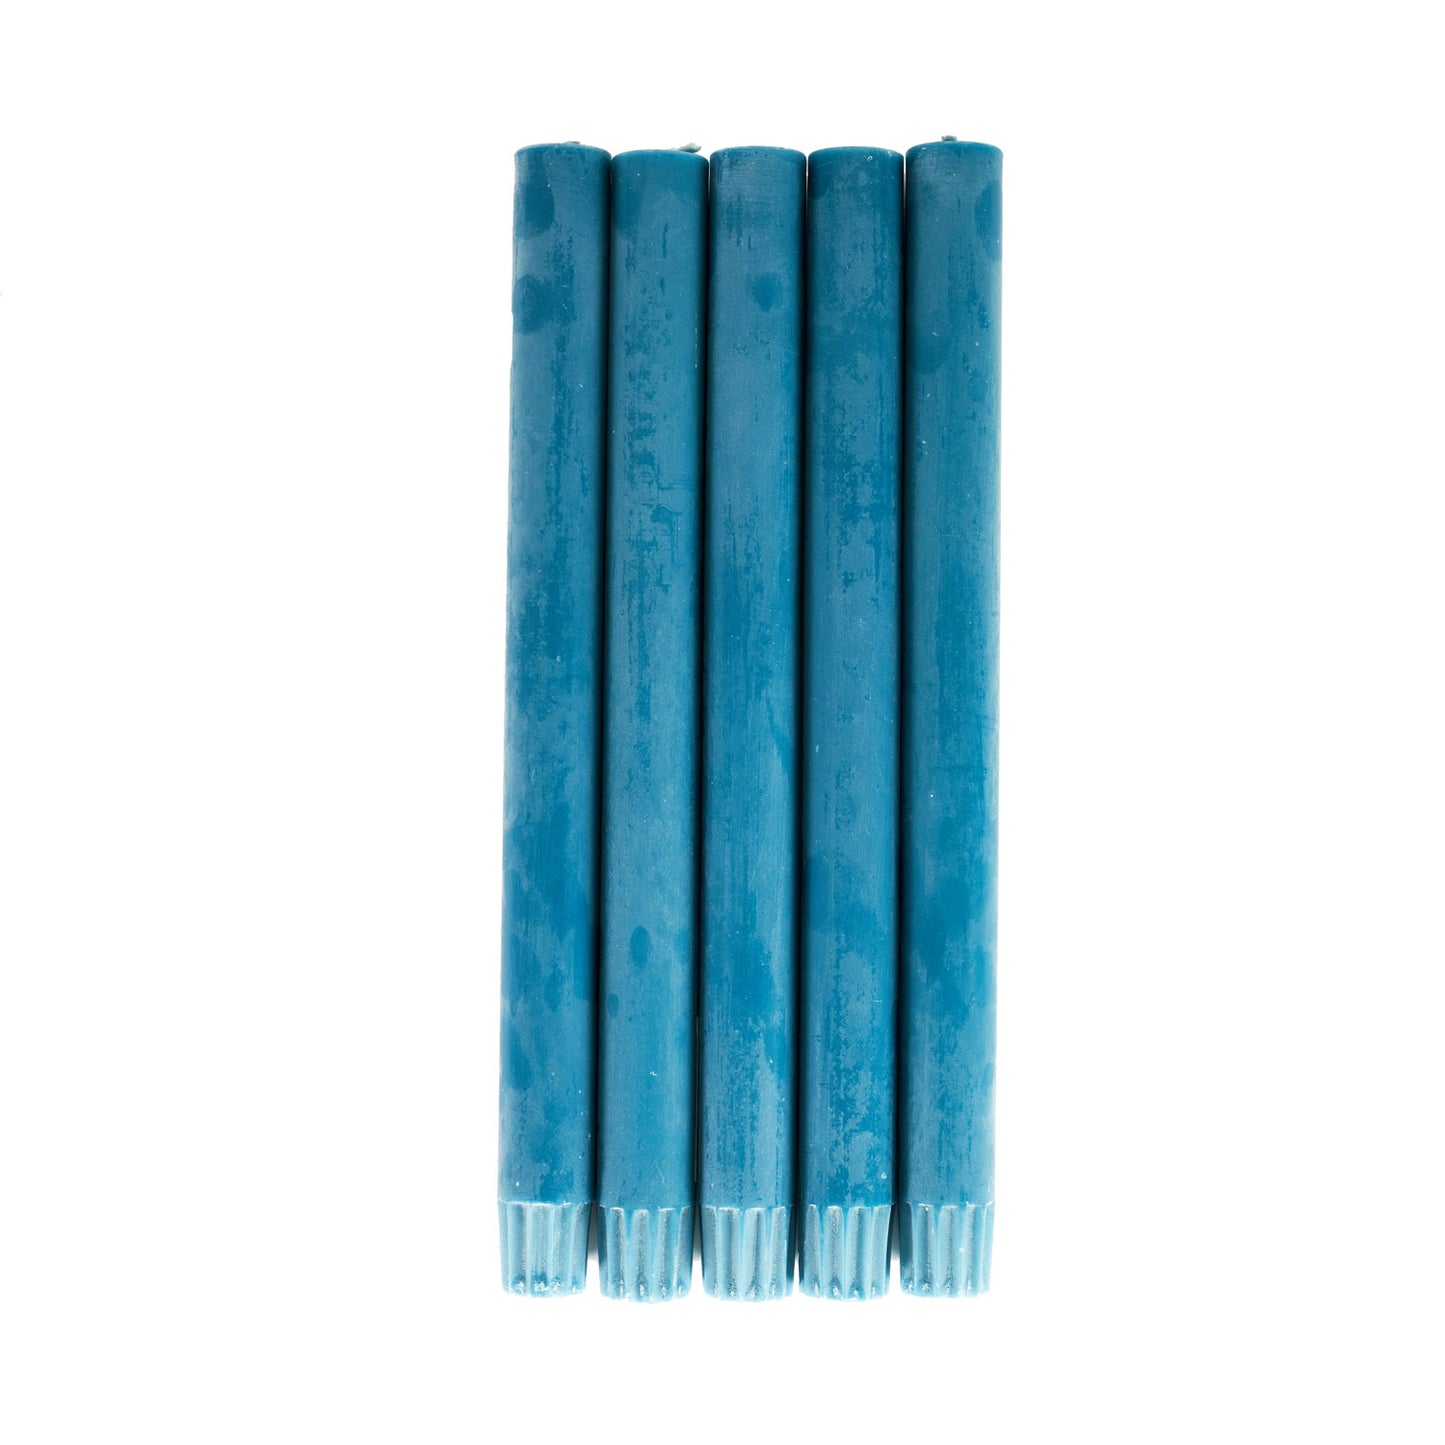 Petrol Blue Dinner Candles - Pack of 25